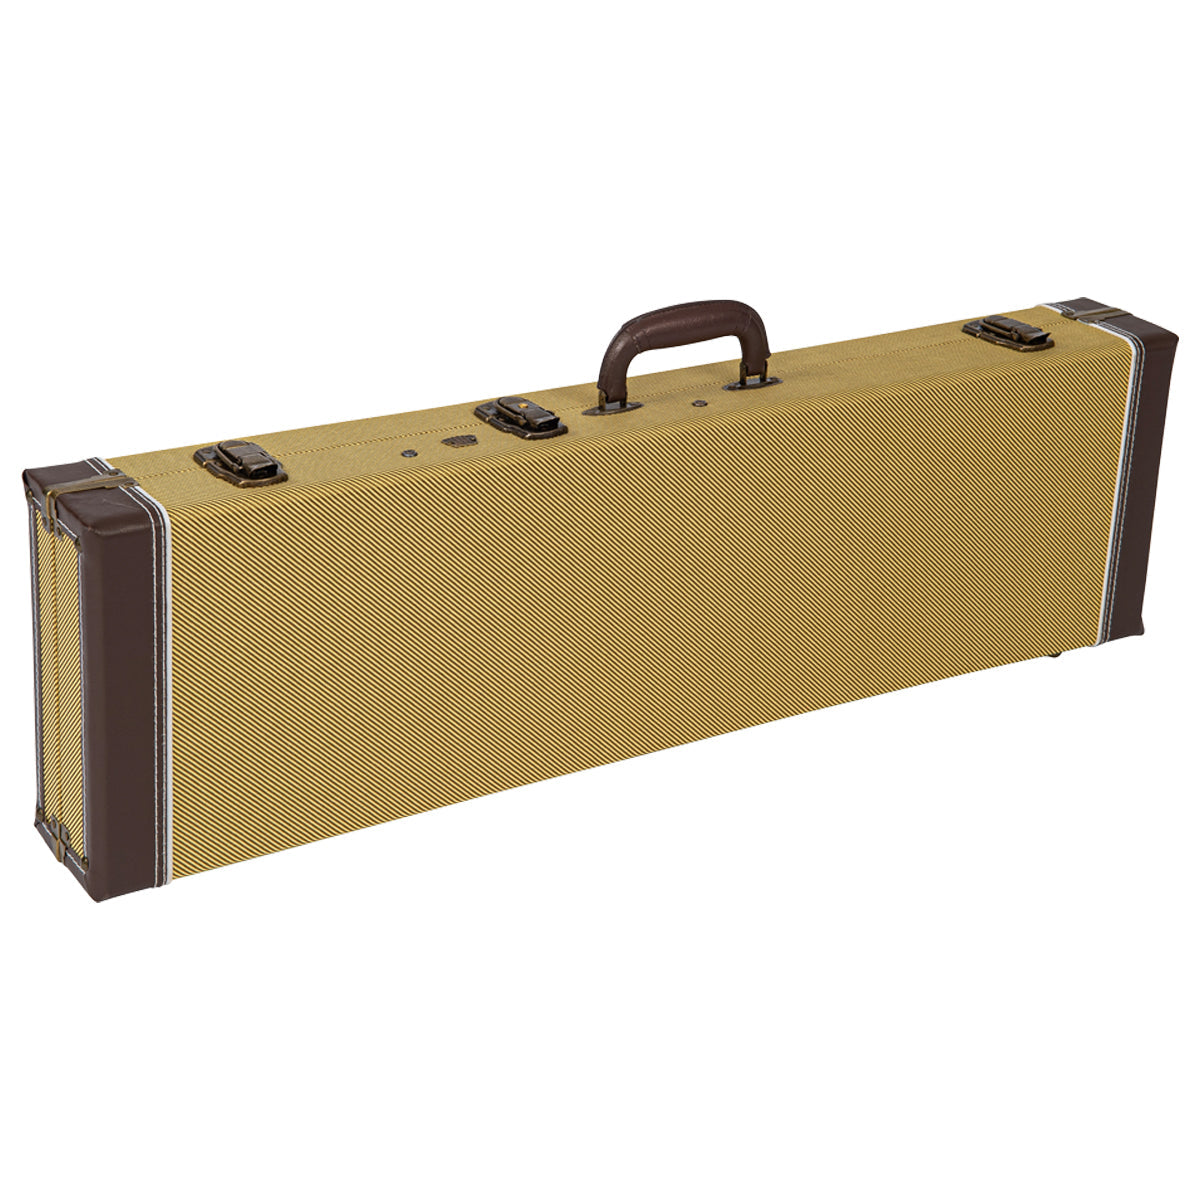 Lace Cigar Box Guitar Case for 3 & 4 string guitars, Cases & Bags - Cigar Box Guitar for sale at Richards Guitars.